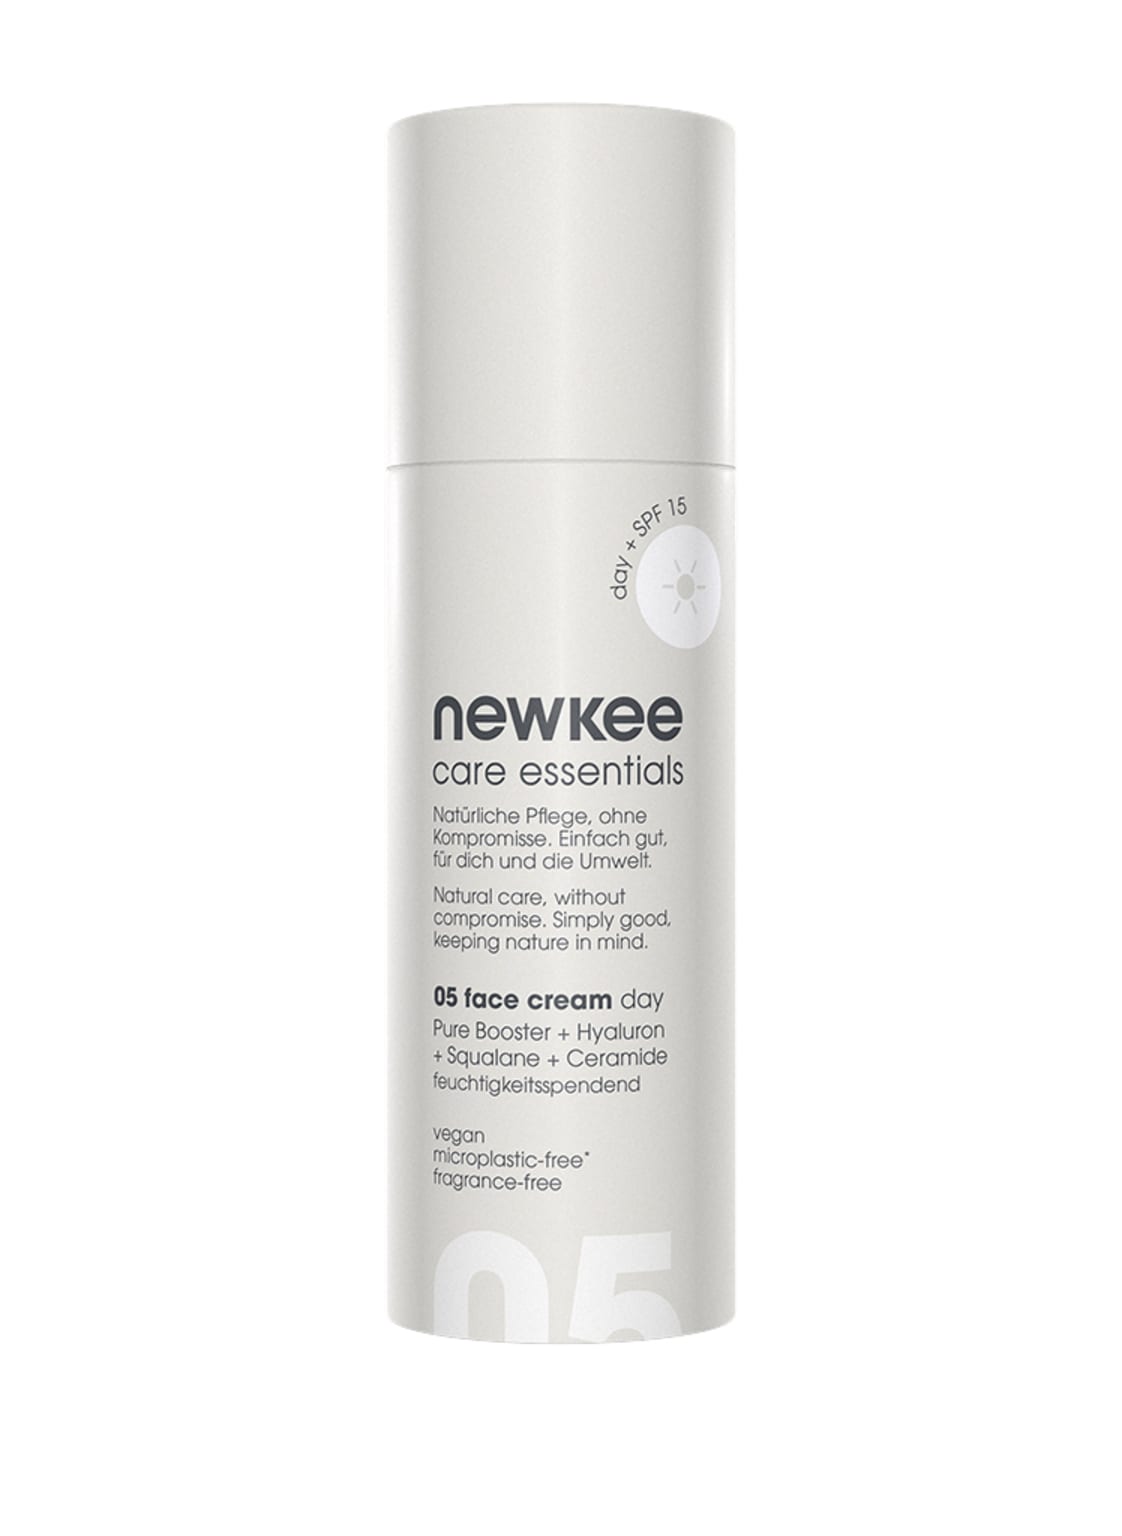 Image of Newkee Face Cream Day Spf 15 Gesichtscreme 50 ml